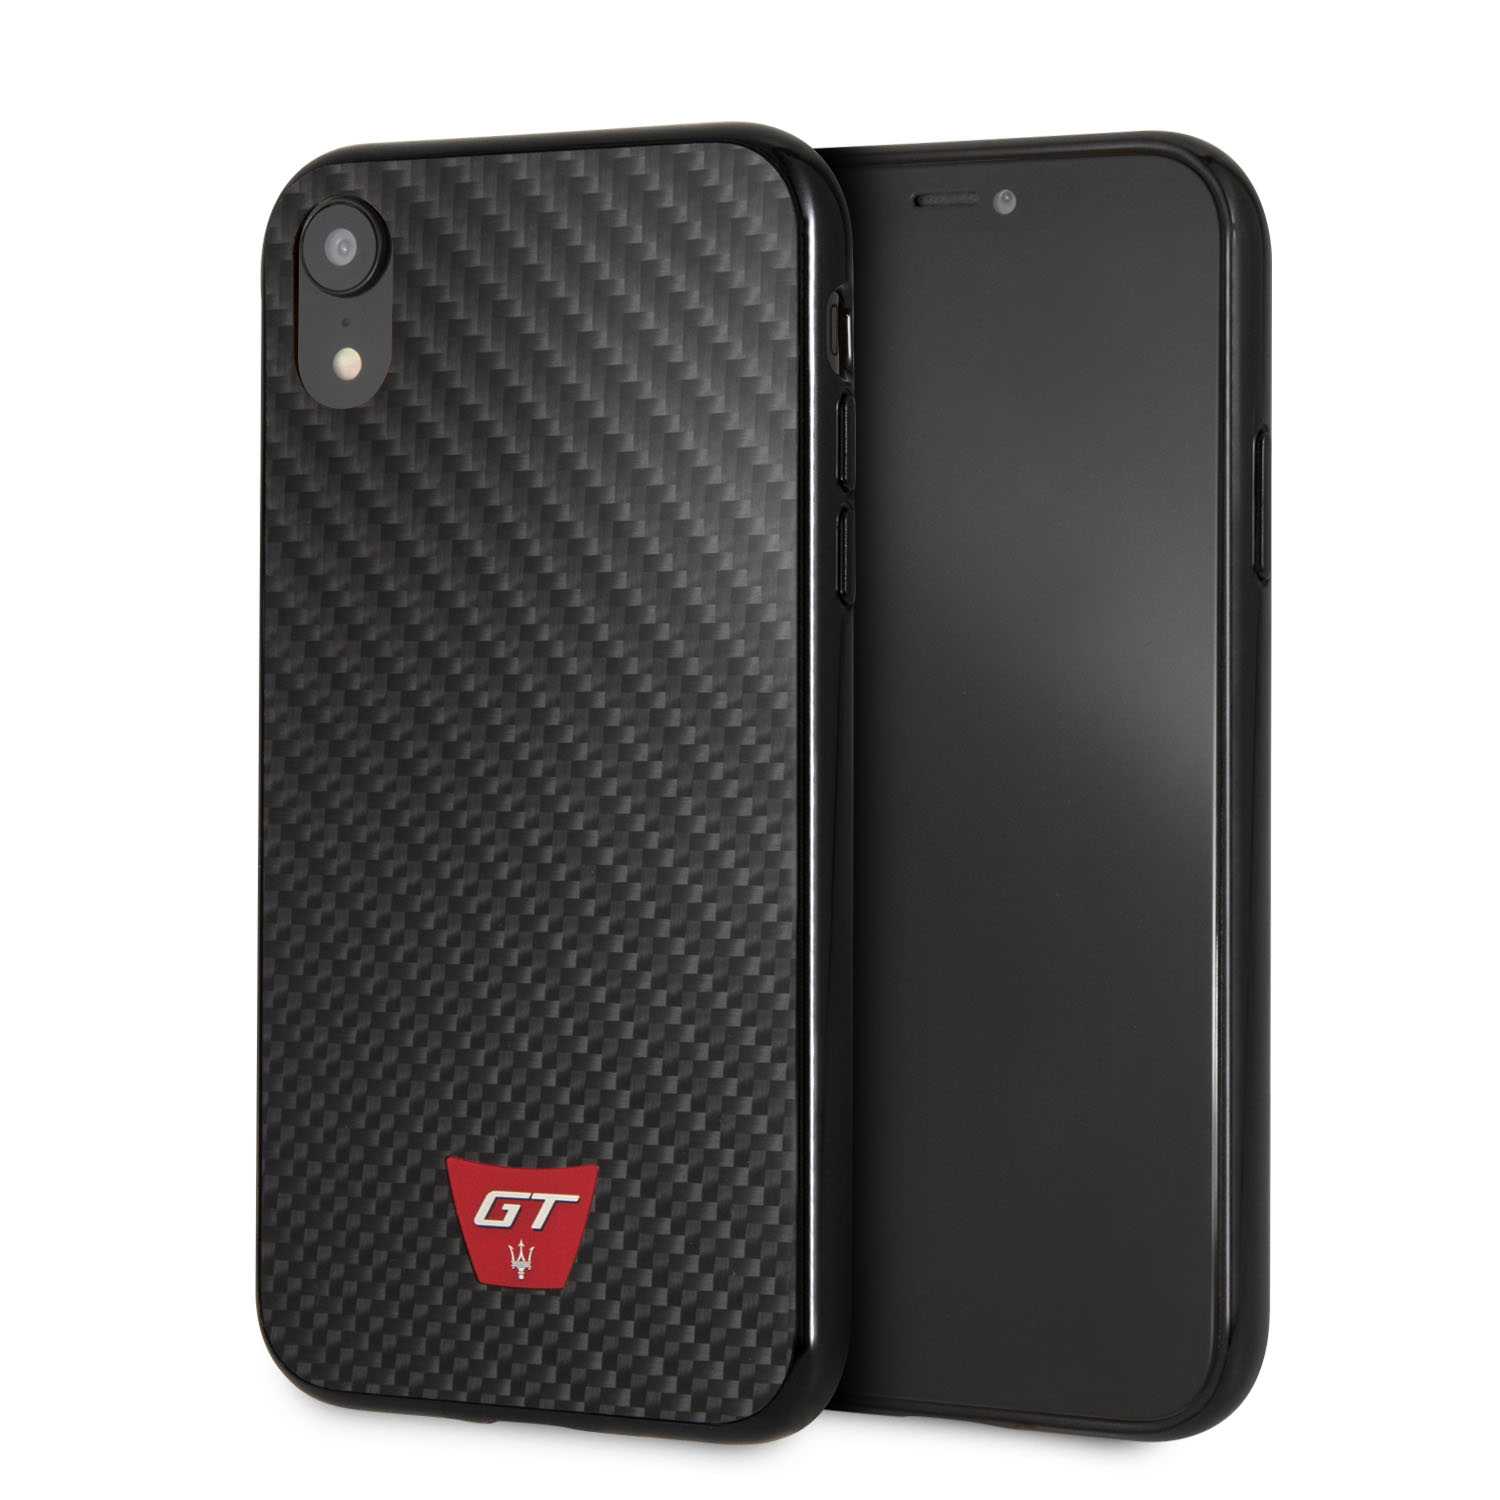 Maserati GT Carbon Case Black for iPhone XR